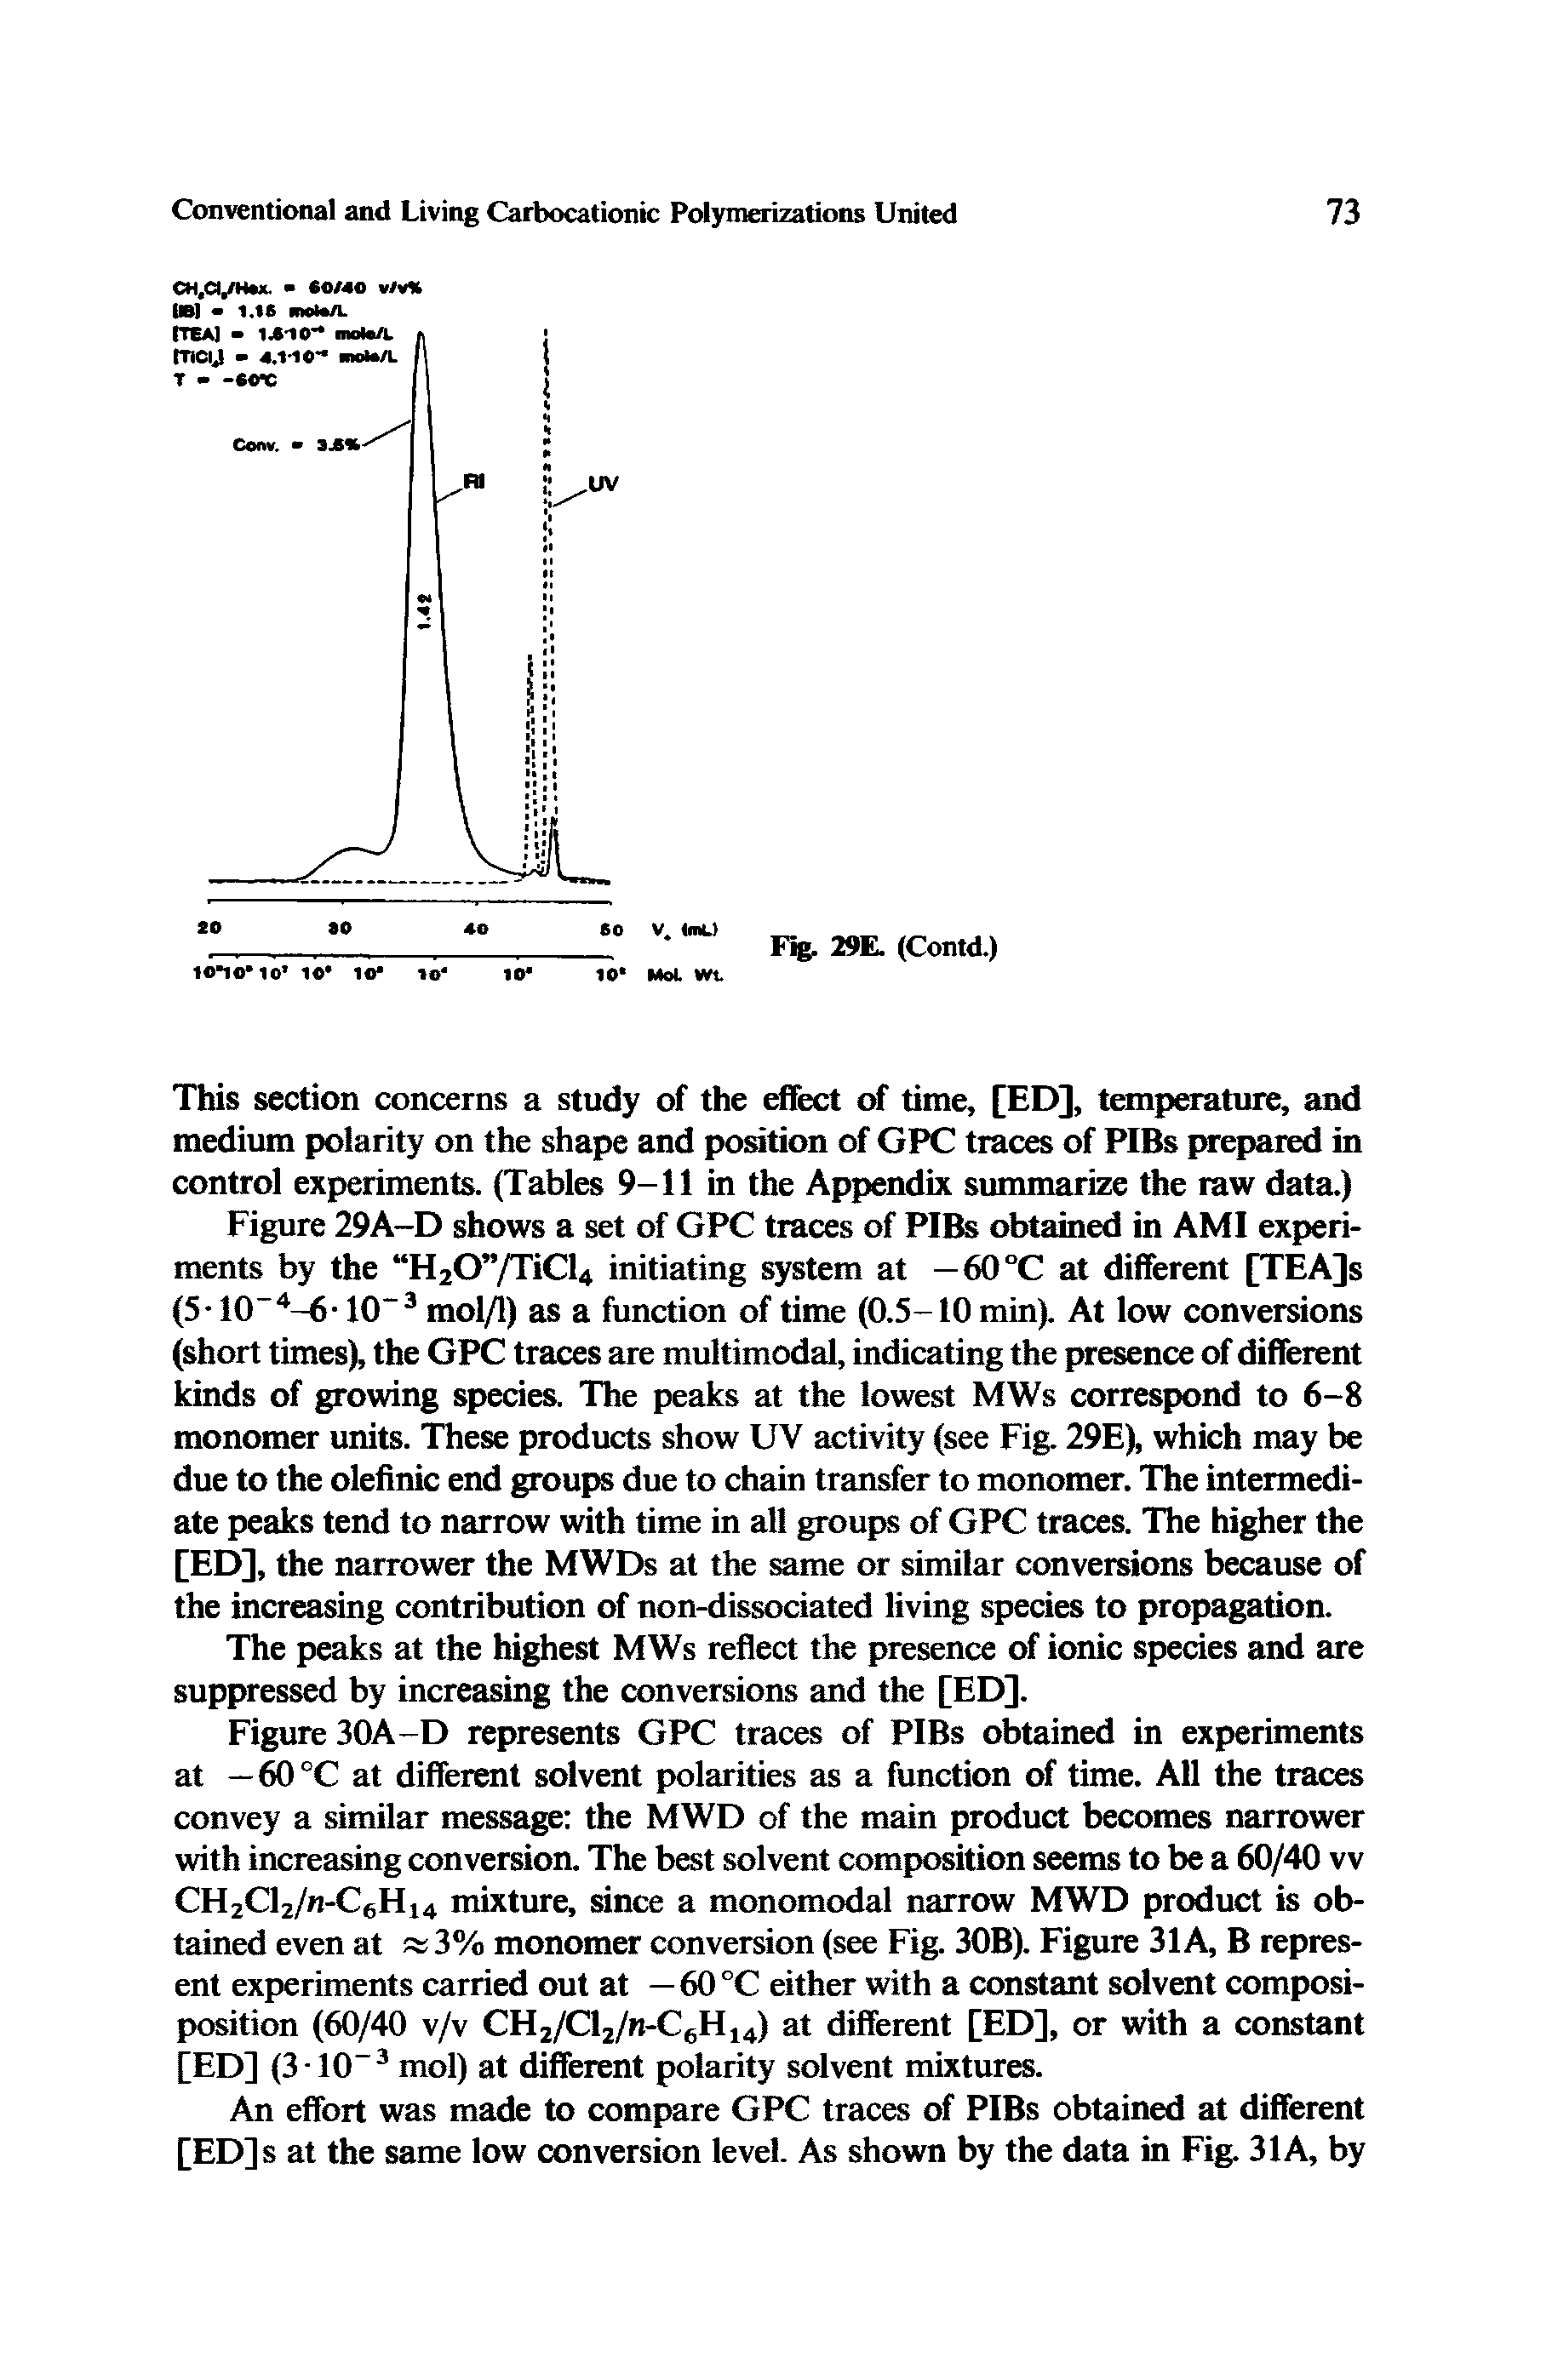 Figure 29A-D shows a set of GPC traces of PIBs obtained in AMI experiments by the H20 /TiCl4 initiating system at — 60°C at different [TEA]s (5-10 -6-10 mol/1) as a function of time (0.5-10 min). At low conversions (short times), the GPC traces are multimodal, indicating the presence of different kinds of growing species. The peaks at the lowest MWs correspond to 6-8 monomer units. These products show UV activity (see Fig. 29E), which may be due to the olefinic end groups due to chain transfer to monomer. The intermediate peaks tend to narrow with time in all groups of GPC traces. The higher the [ED], the narrower the MWDs at the same or similar conversions because of the increasing contribution of non-dissociated living species to propagation.